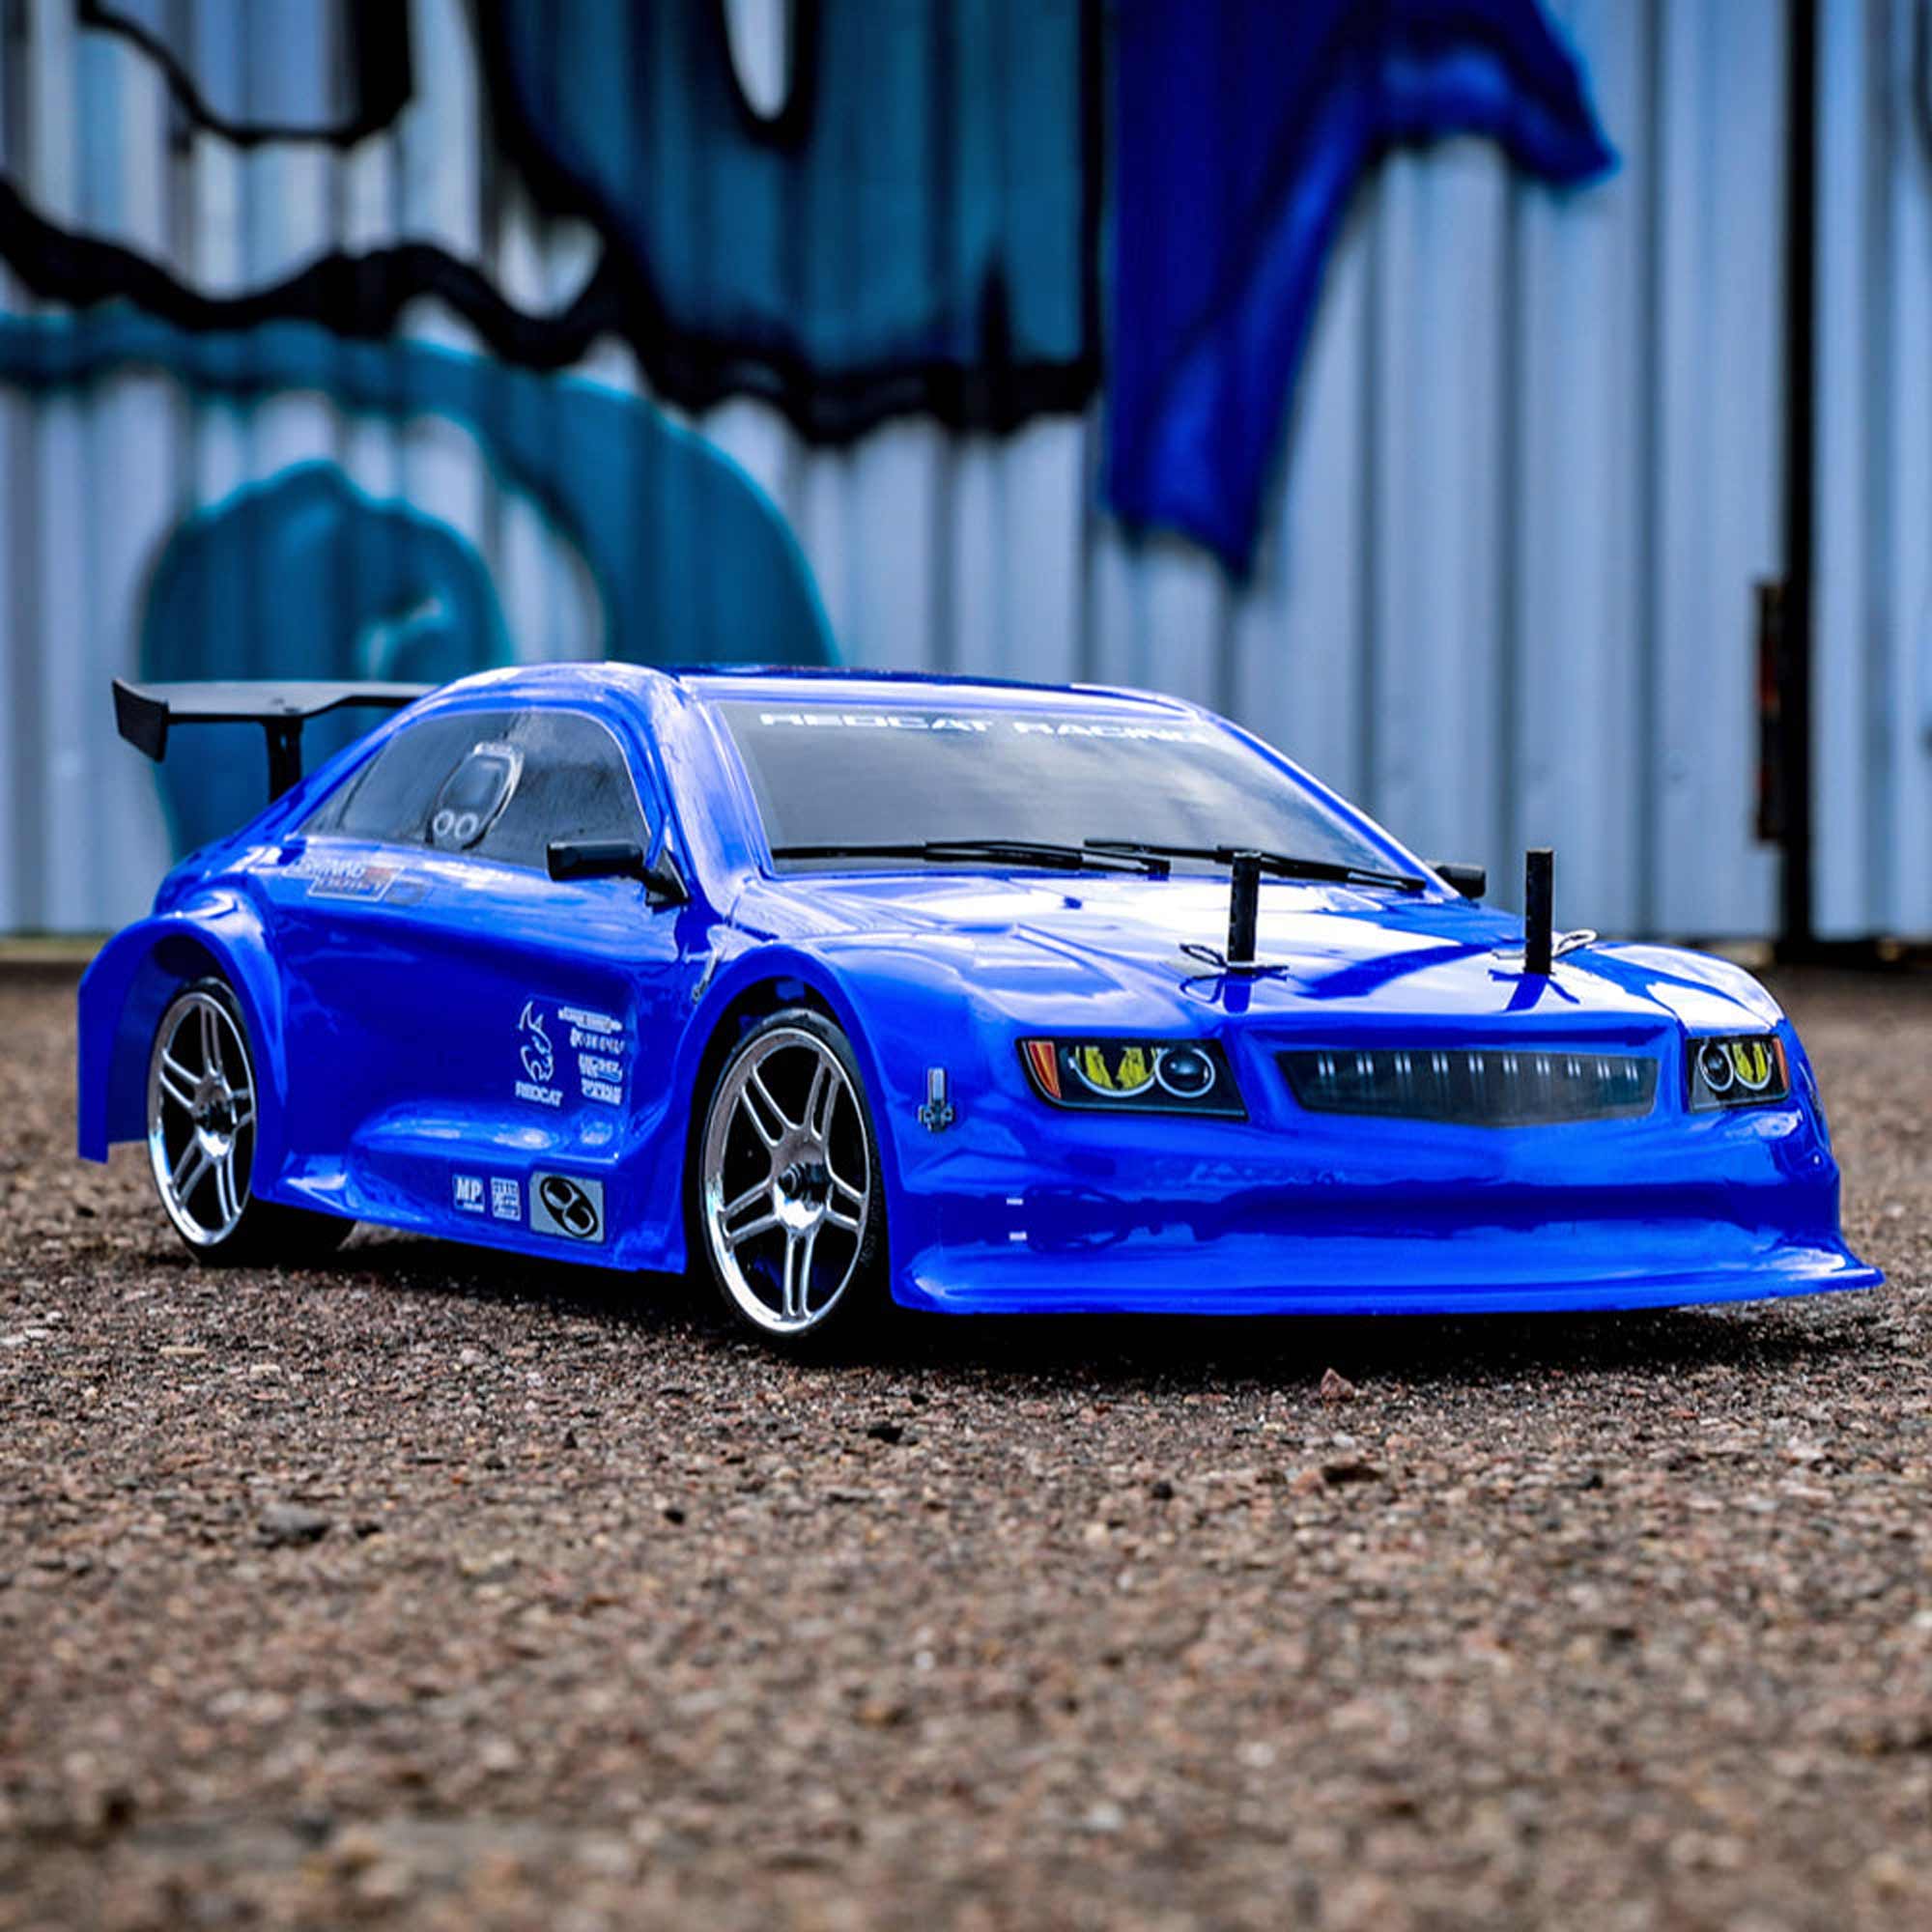 Redcat Racing 1/10 Lightning EPX Drift 4 Wheel Drive Brushed RTR Ready to Run Blue RER08003 Cars Electric RTR 1/10 Off-Road - image 5 of 11